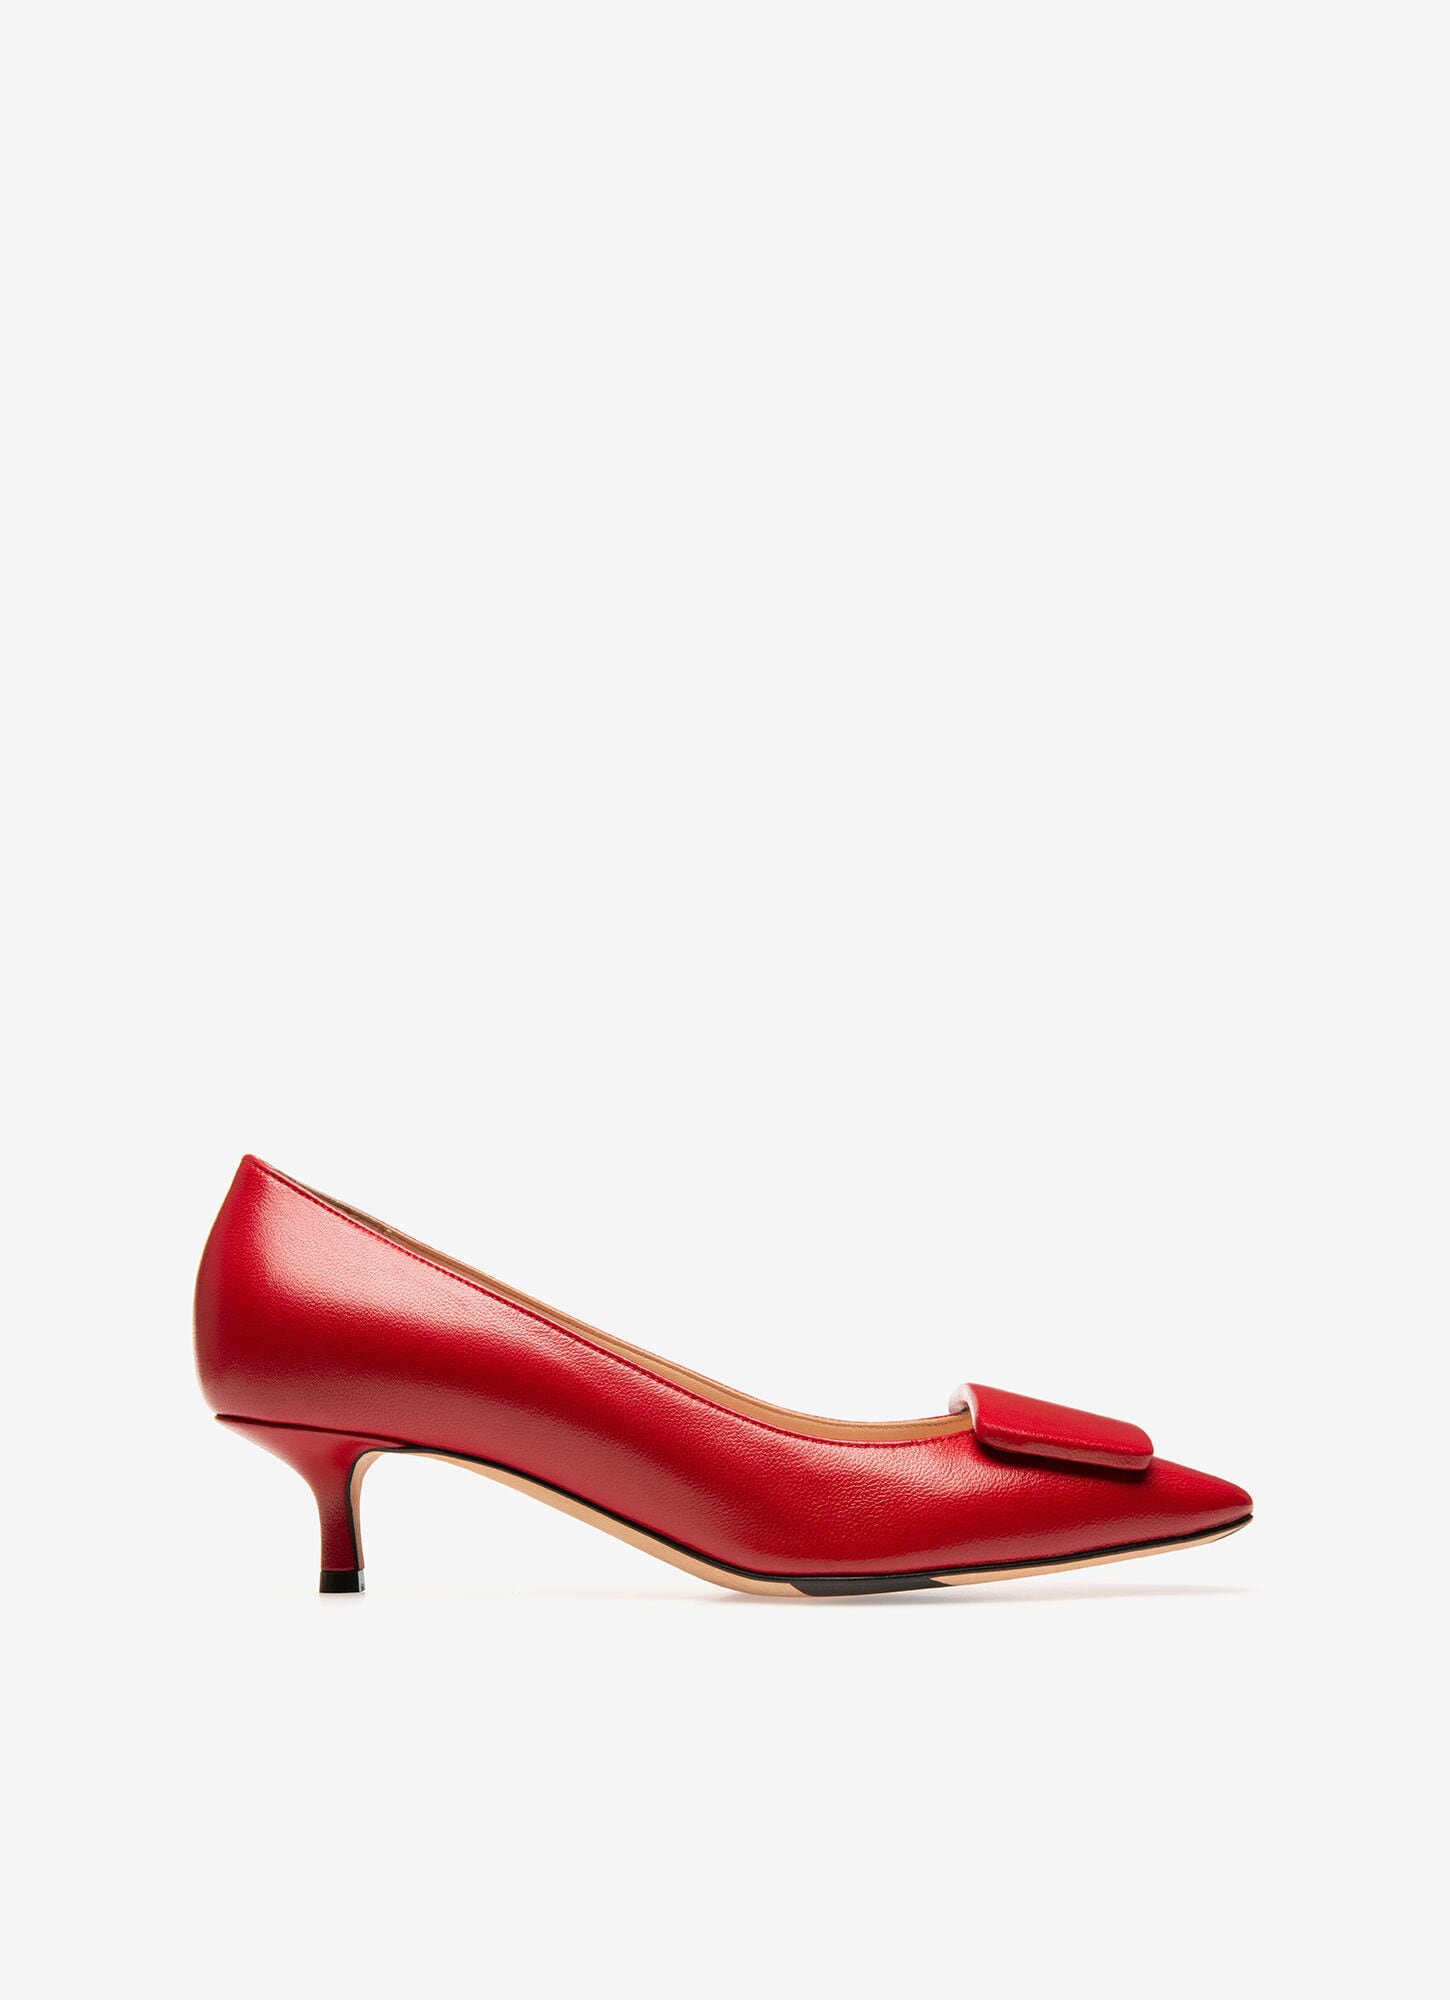 CLAUDIE | Womens Pumps | Red Leather 